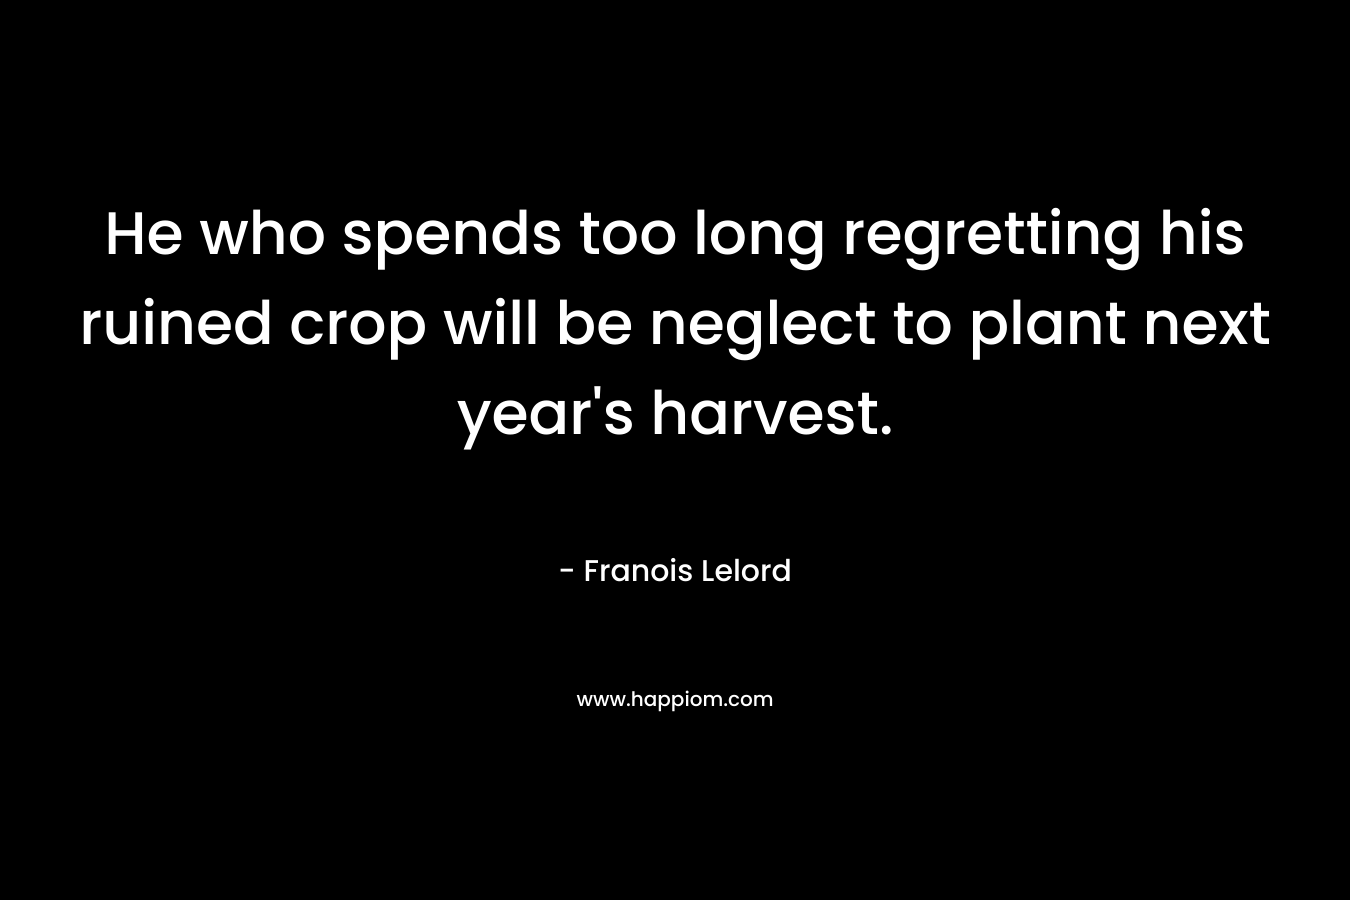 He who spends too long regretting his ruined crop will be neglect to plant next year's harvest.